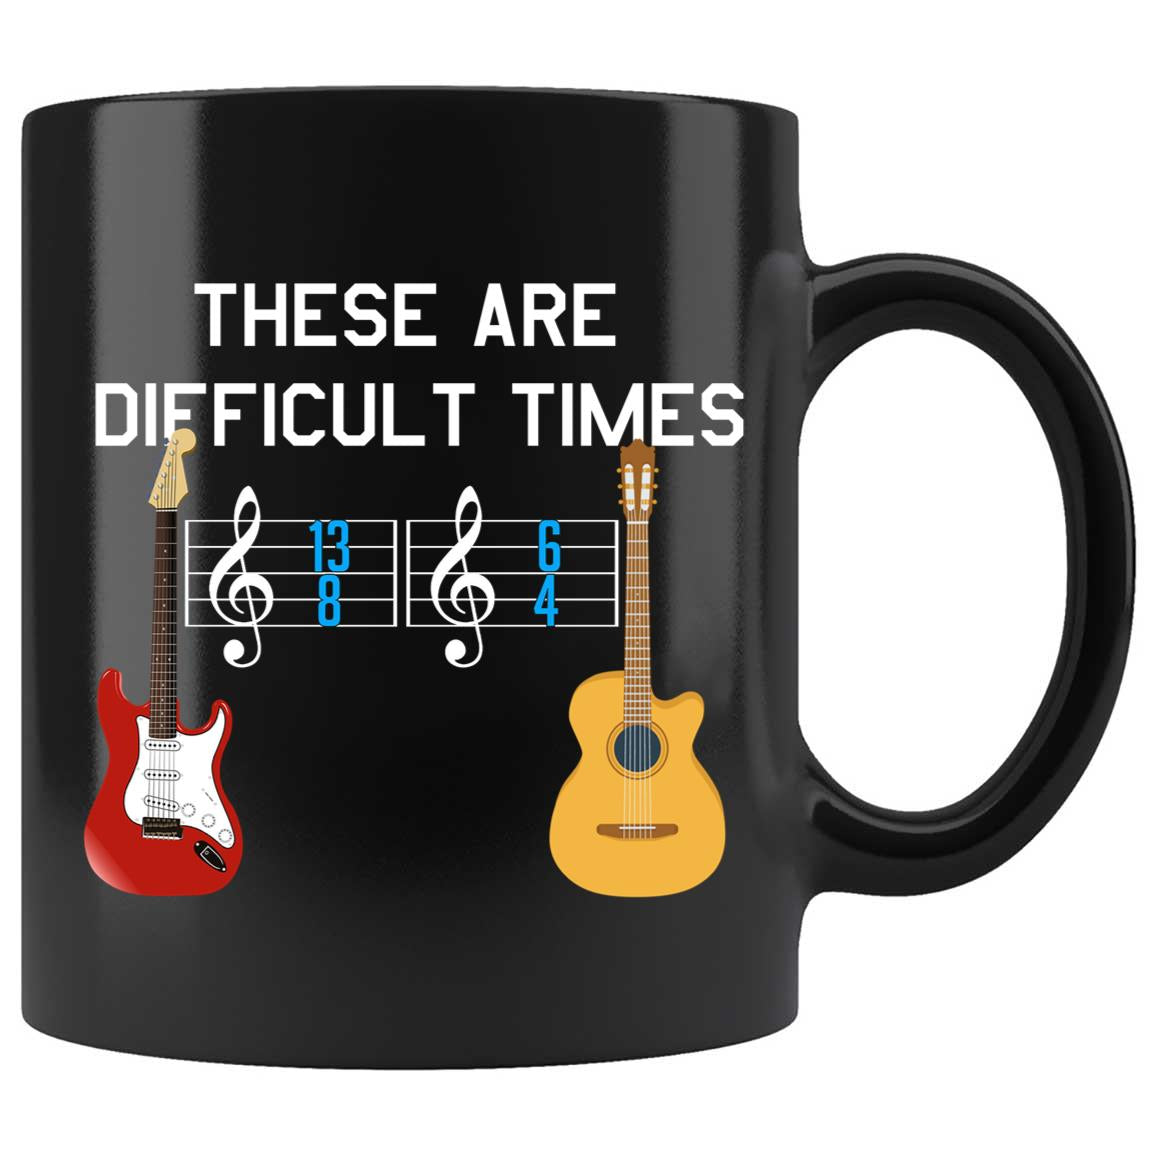 Skitongifts Coffee Mug Funny Ceramic Novelty NH05022022 - These Are Difficult Times, Ideas For Guitar Lover Mxaxtil